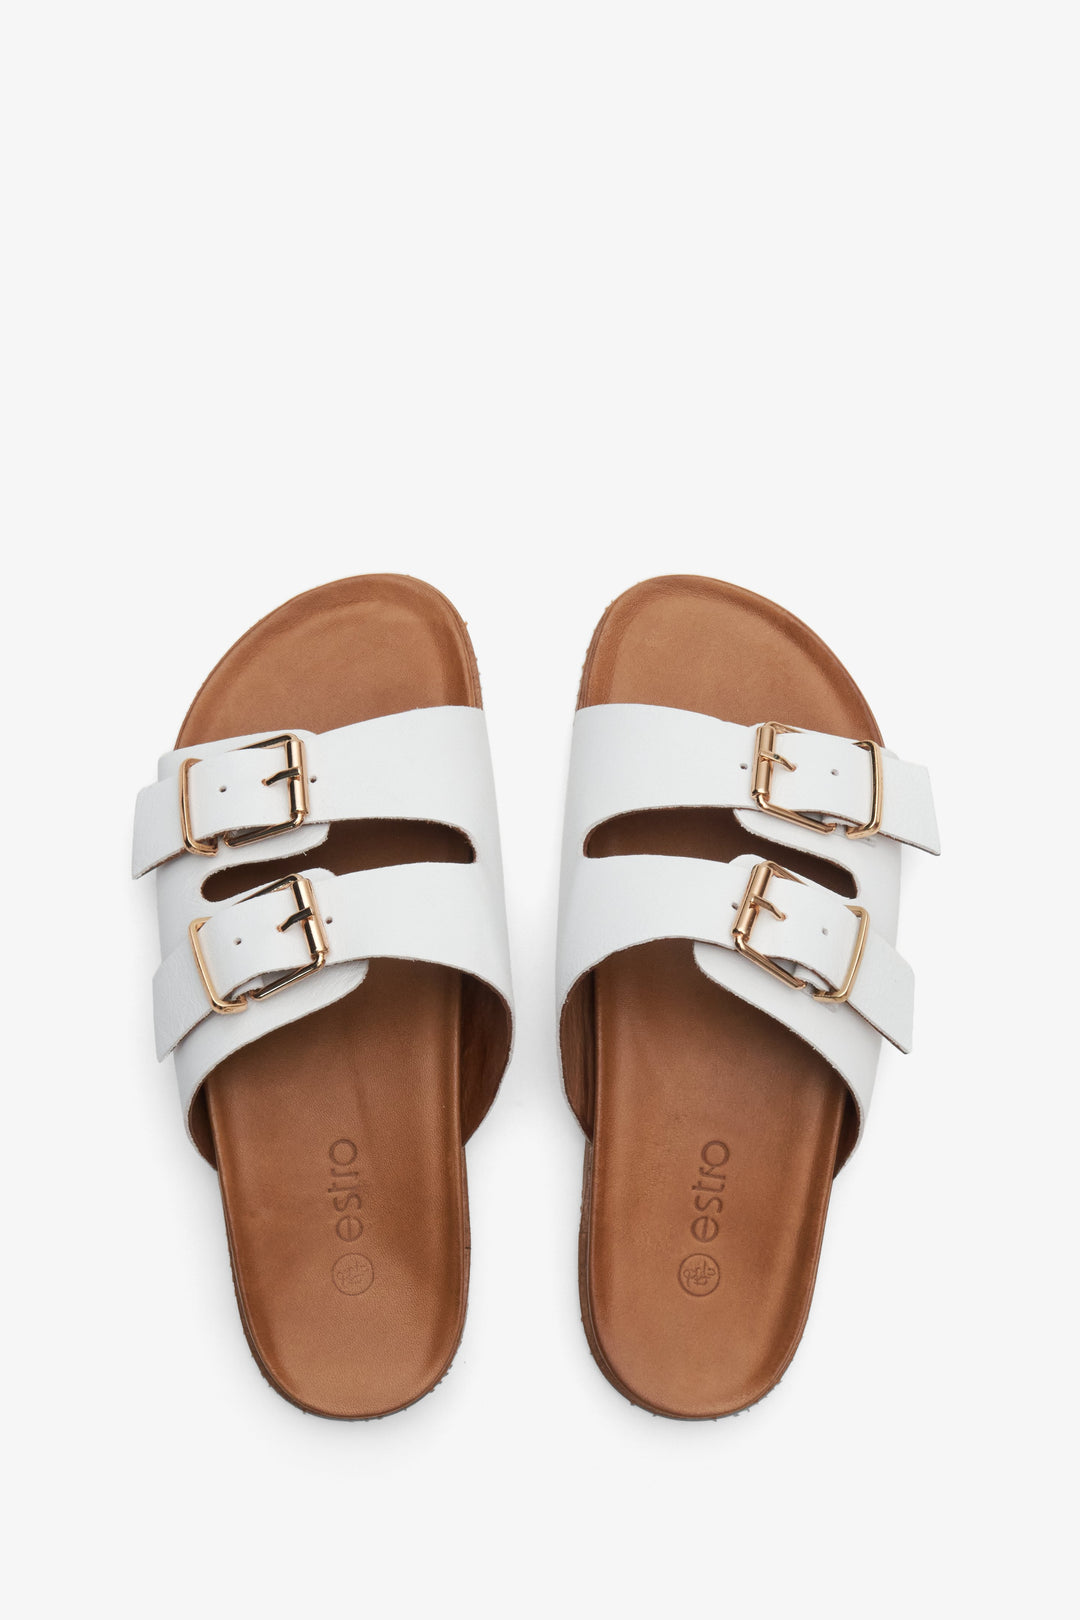 Women's white Estro slide sandals made of Italian natural leather - presentation of shoes from above.